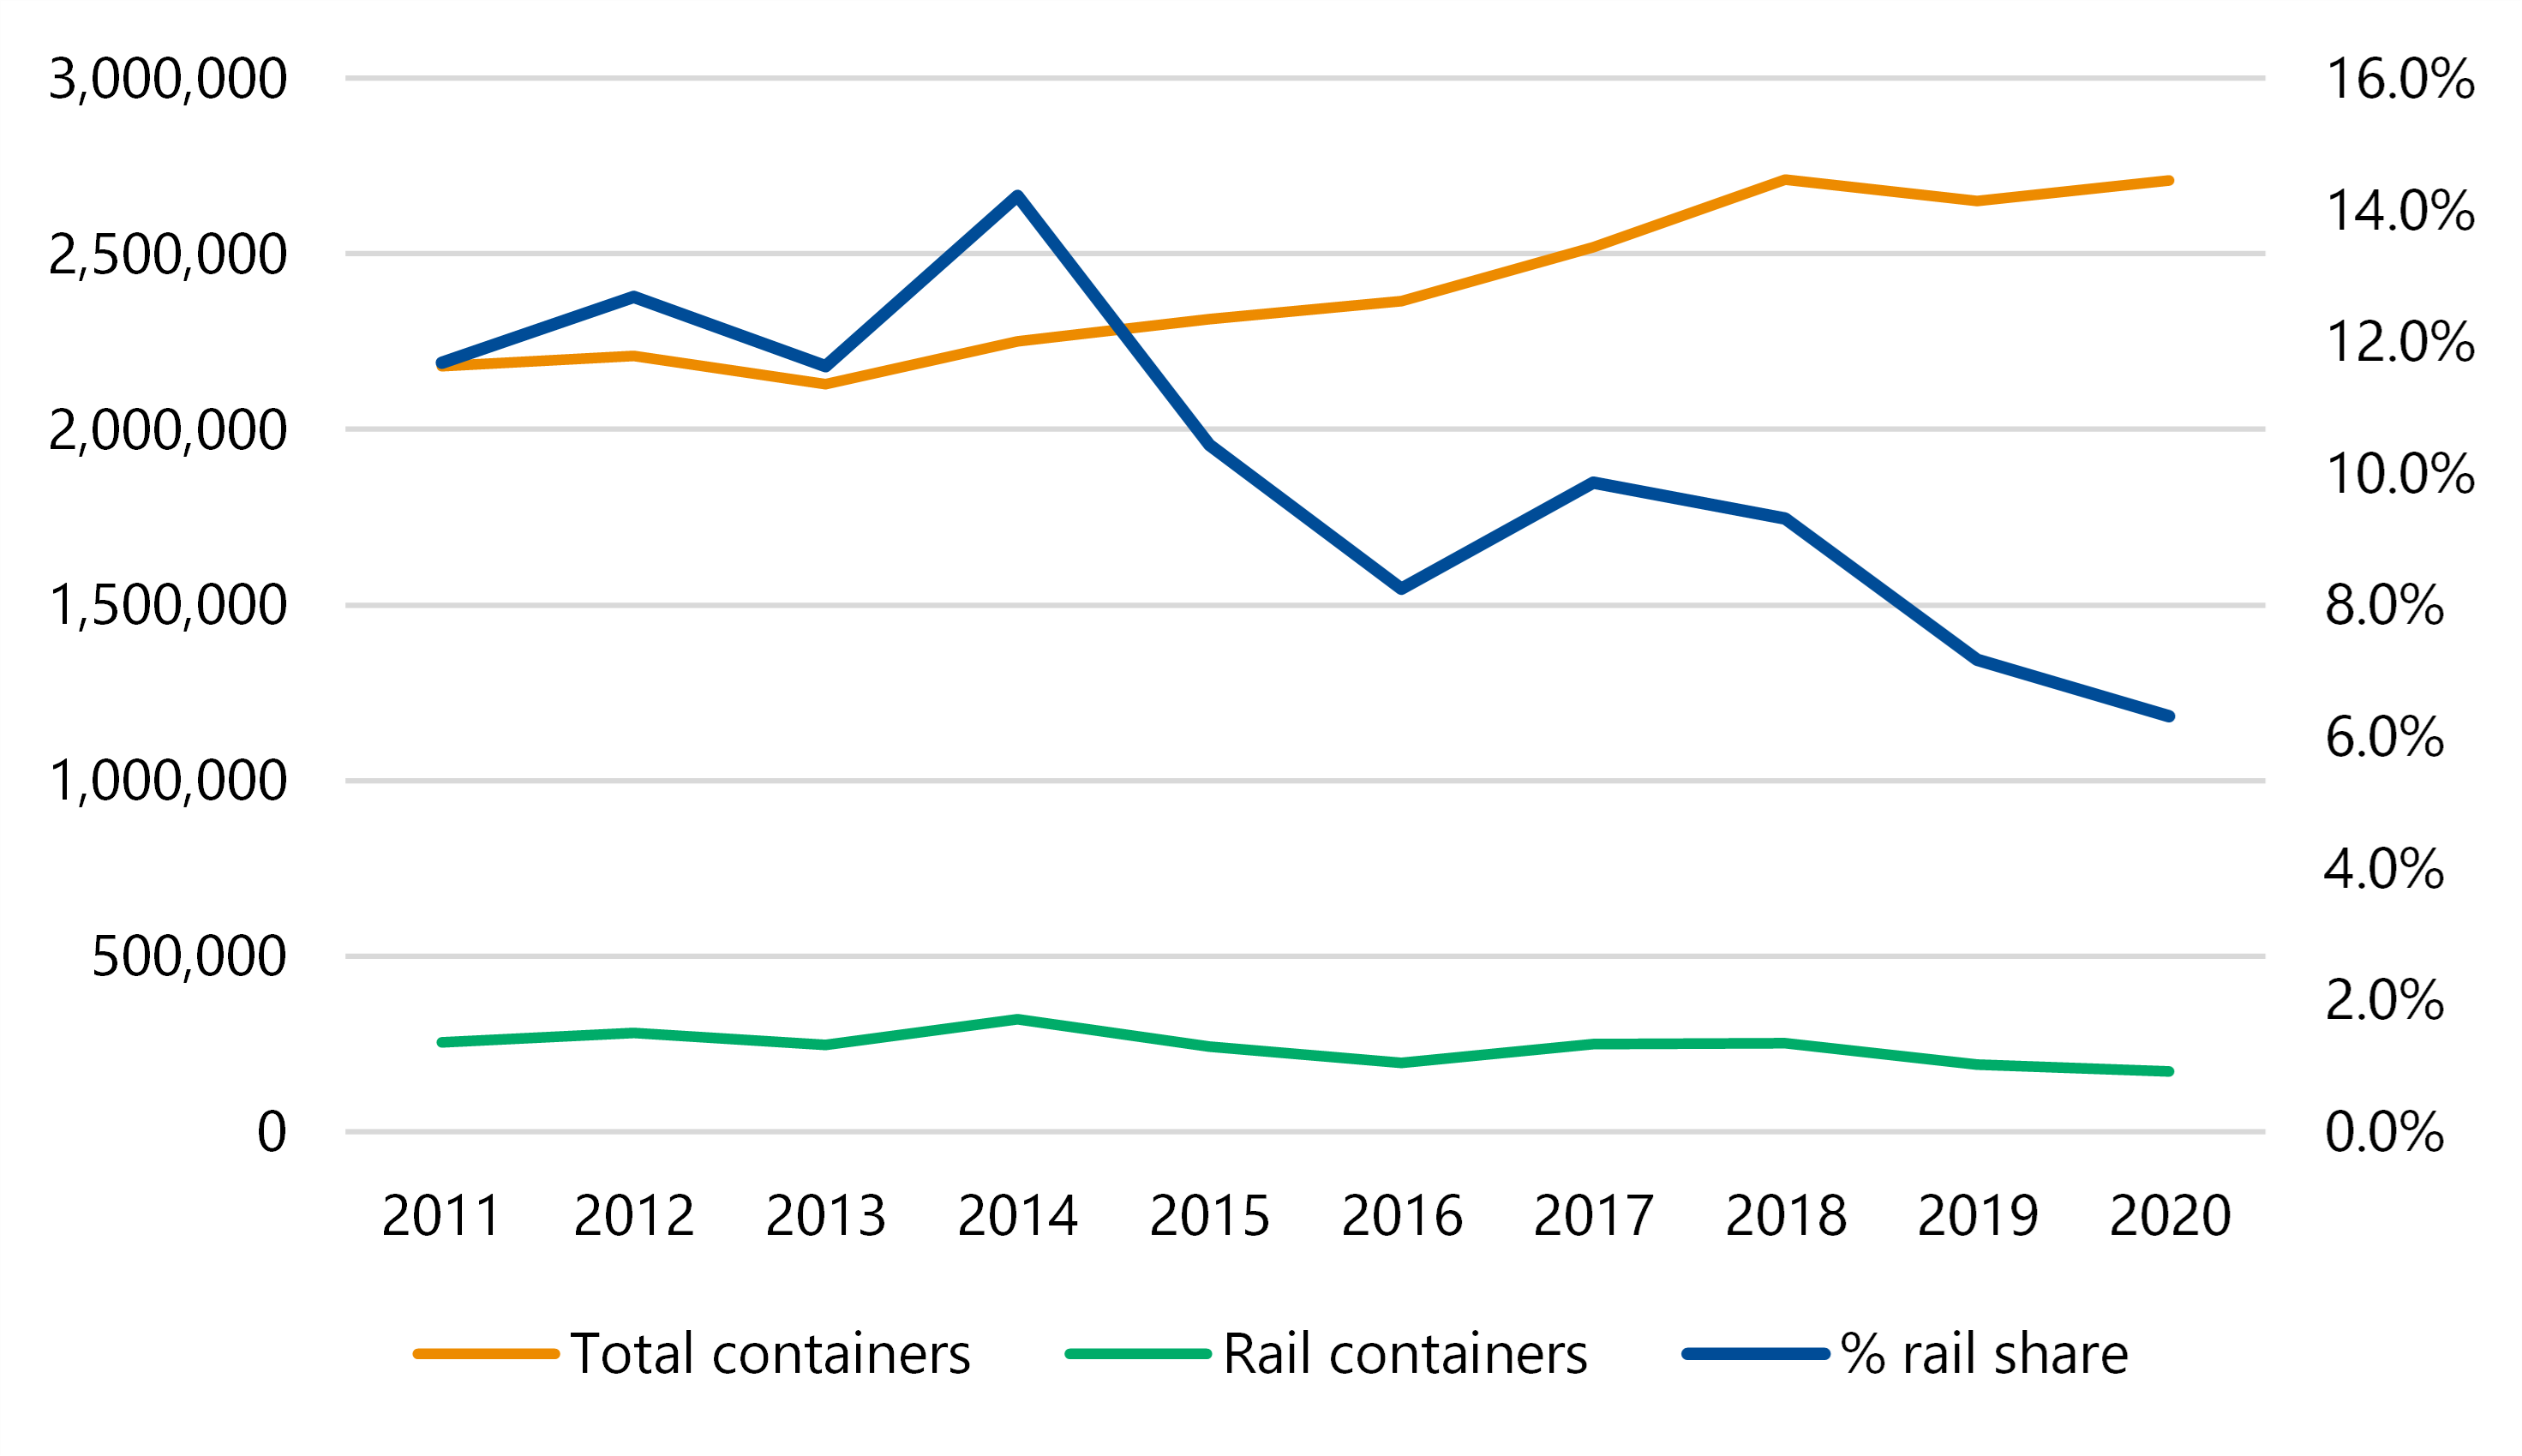 Between 2011 and 2020, total containers through the Port of Melbourne had grown from 2.2 million to about 2.7 million annually. The amount using rail had not grown, leading to a drop in its share from about 12% to about 6.5%